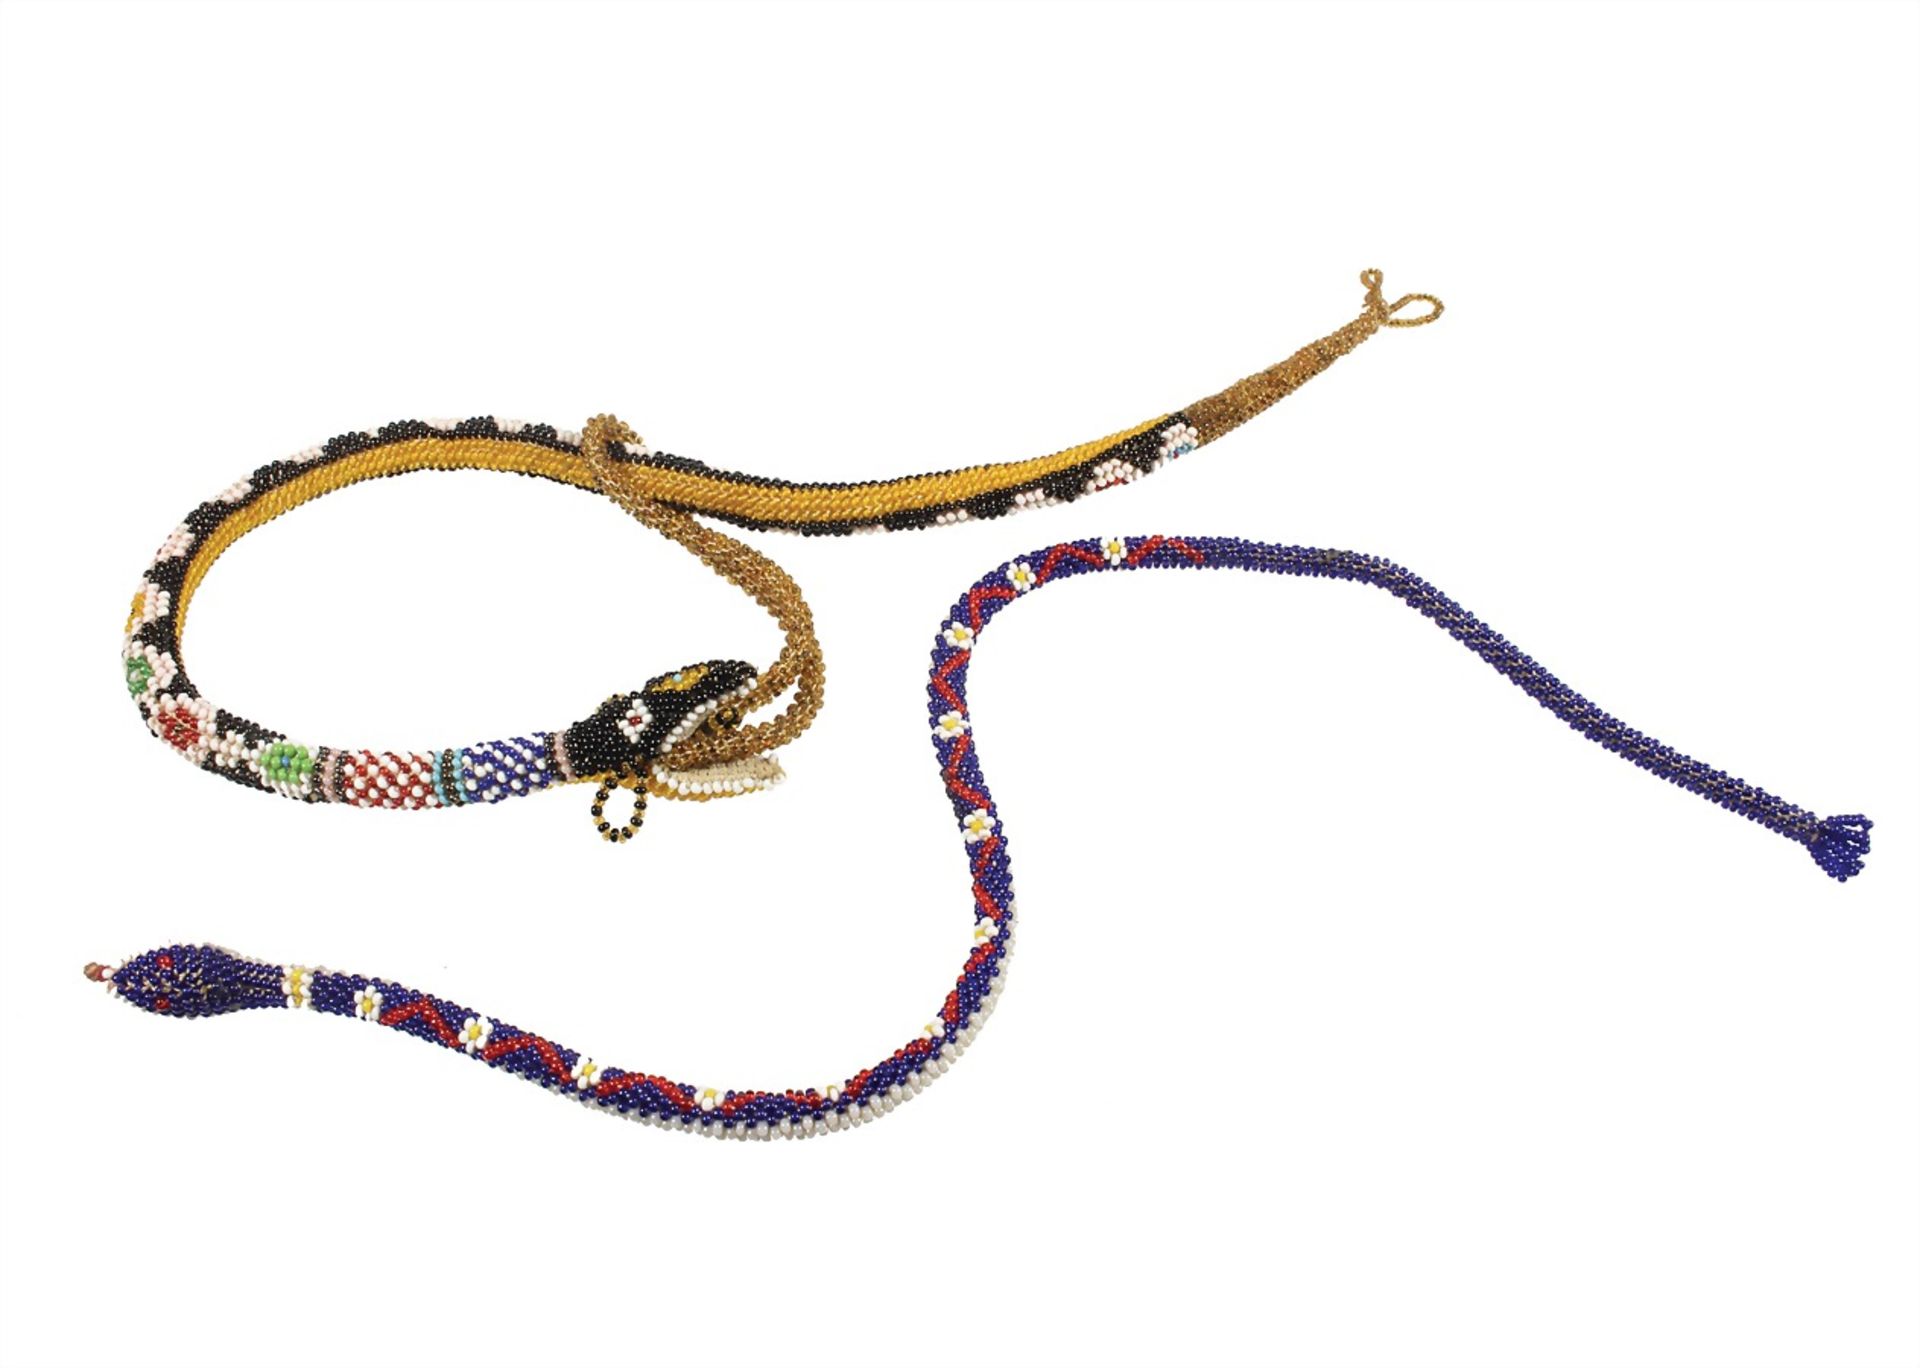 lot: two CHARLESTON-NECKLACES in the style of 1920s, two snakes , made with colorful glass beads,